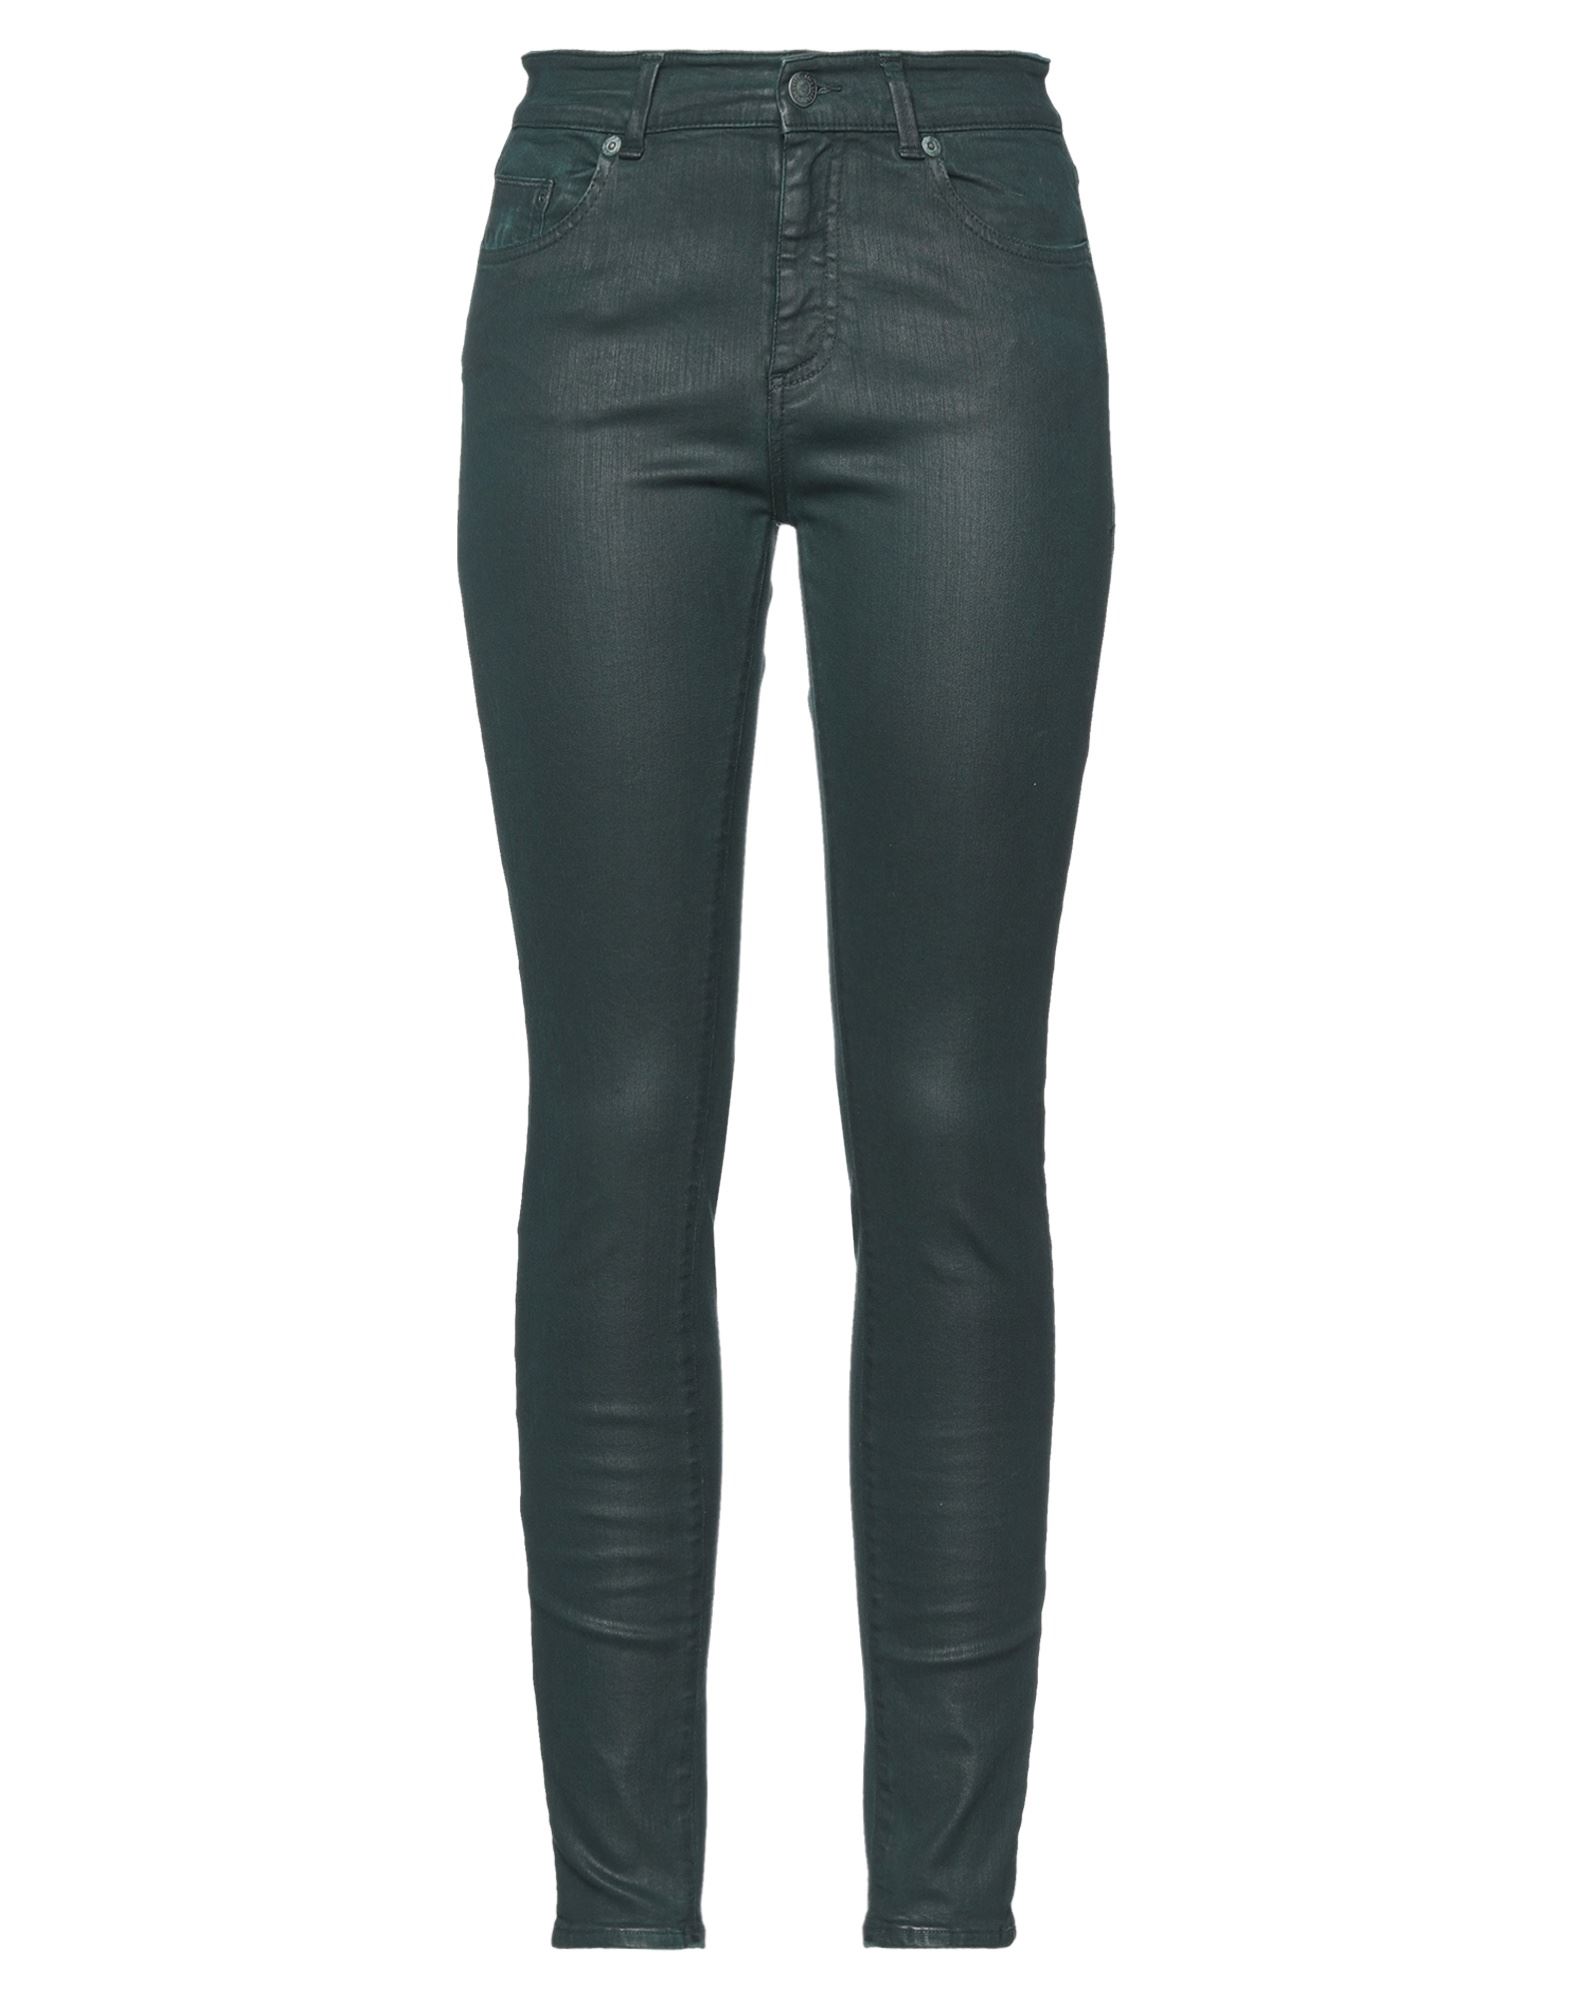 Care Label Jeans In Green